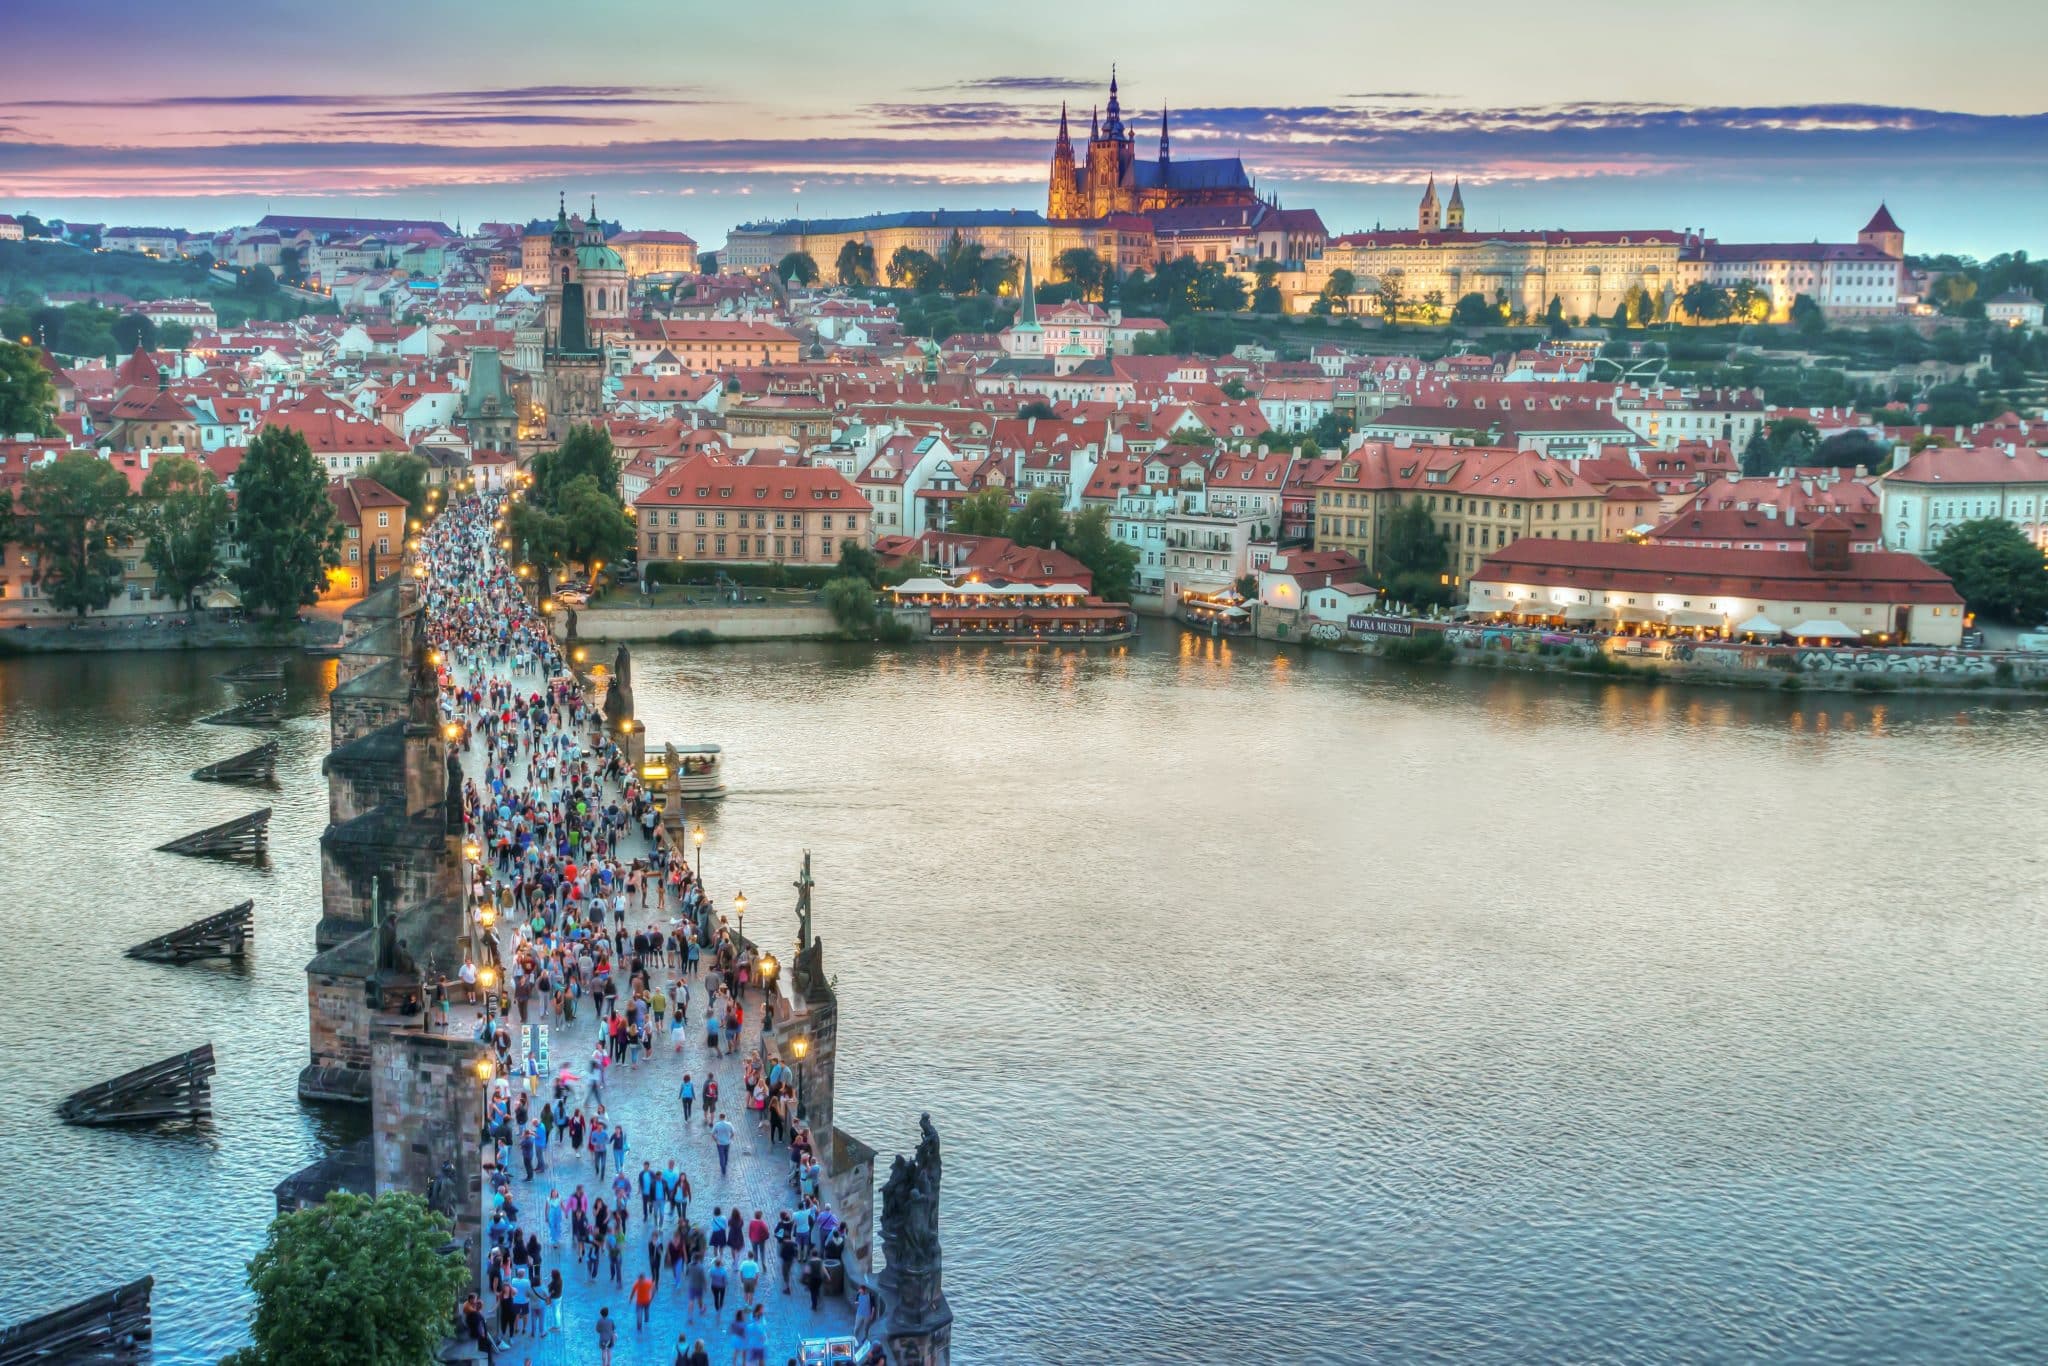 Prague Relocation agency Relocare. Relocation, Immigration, business visa and A1 services.